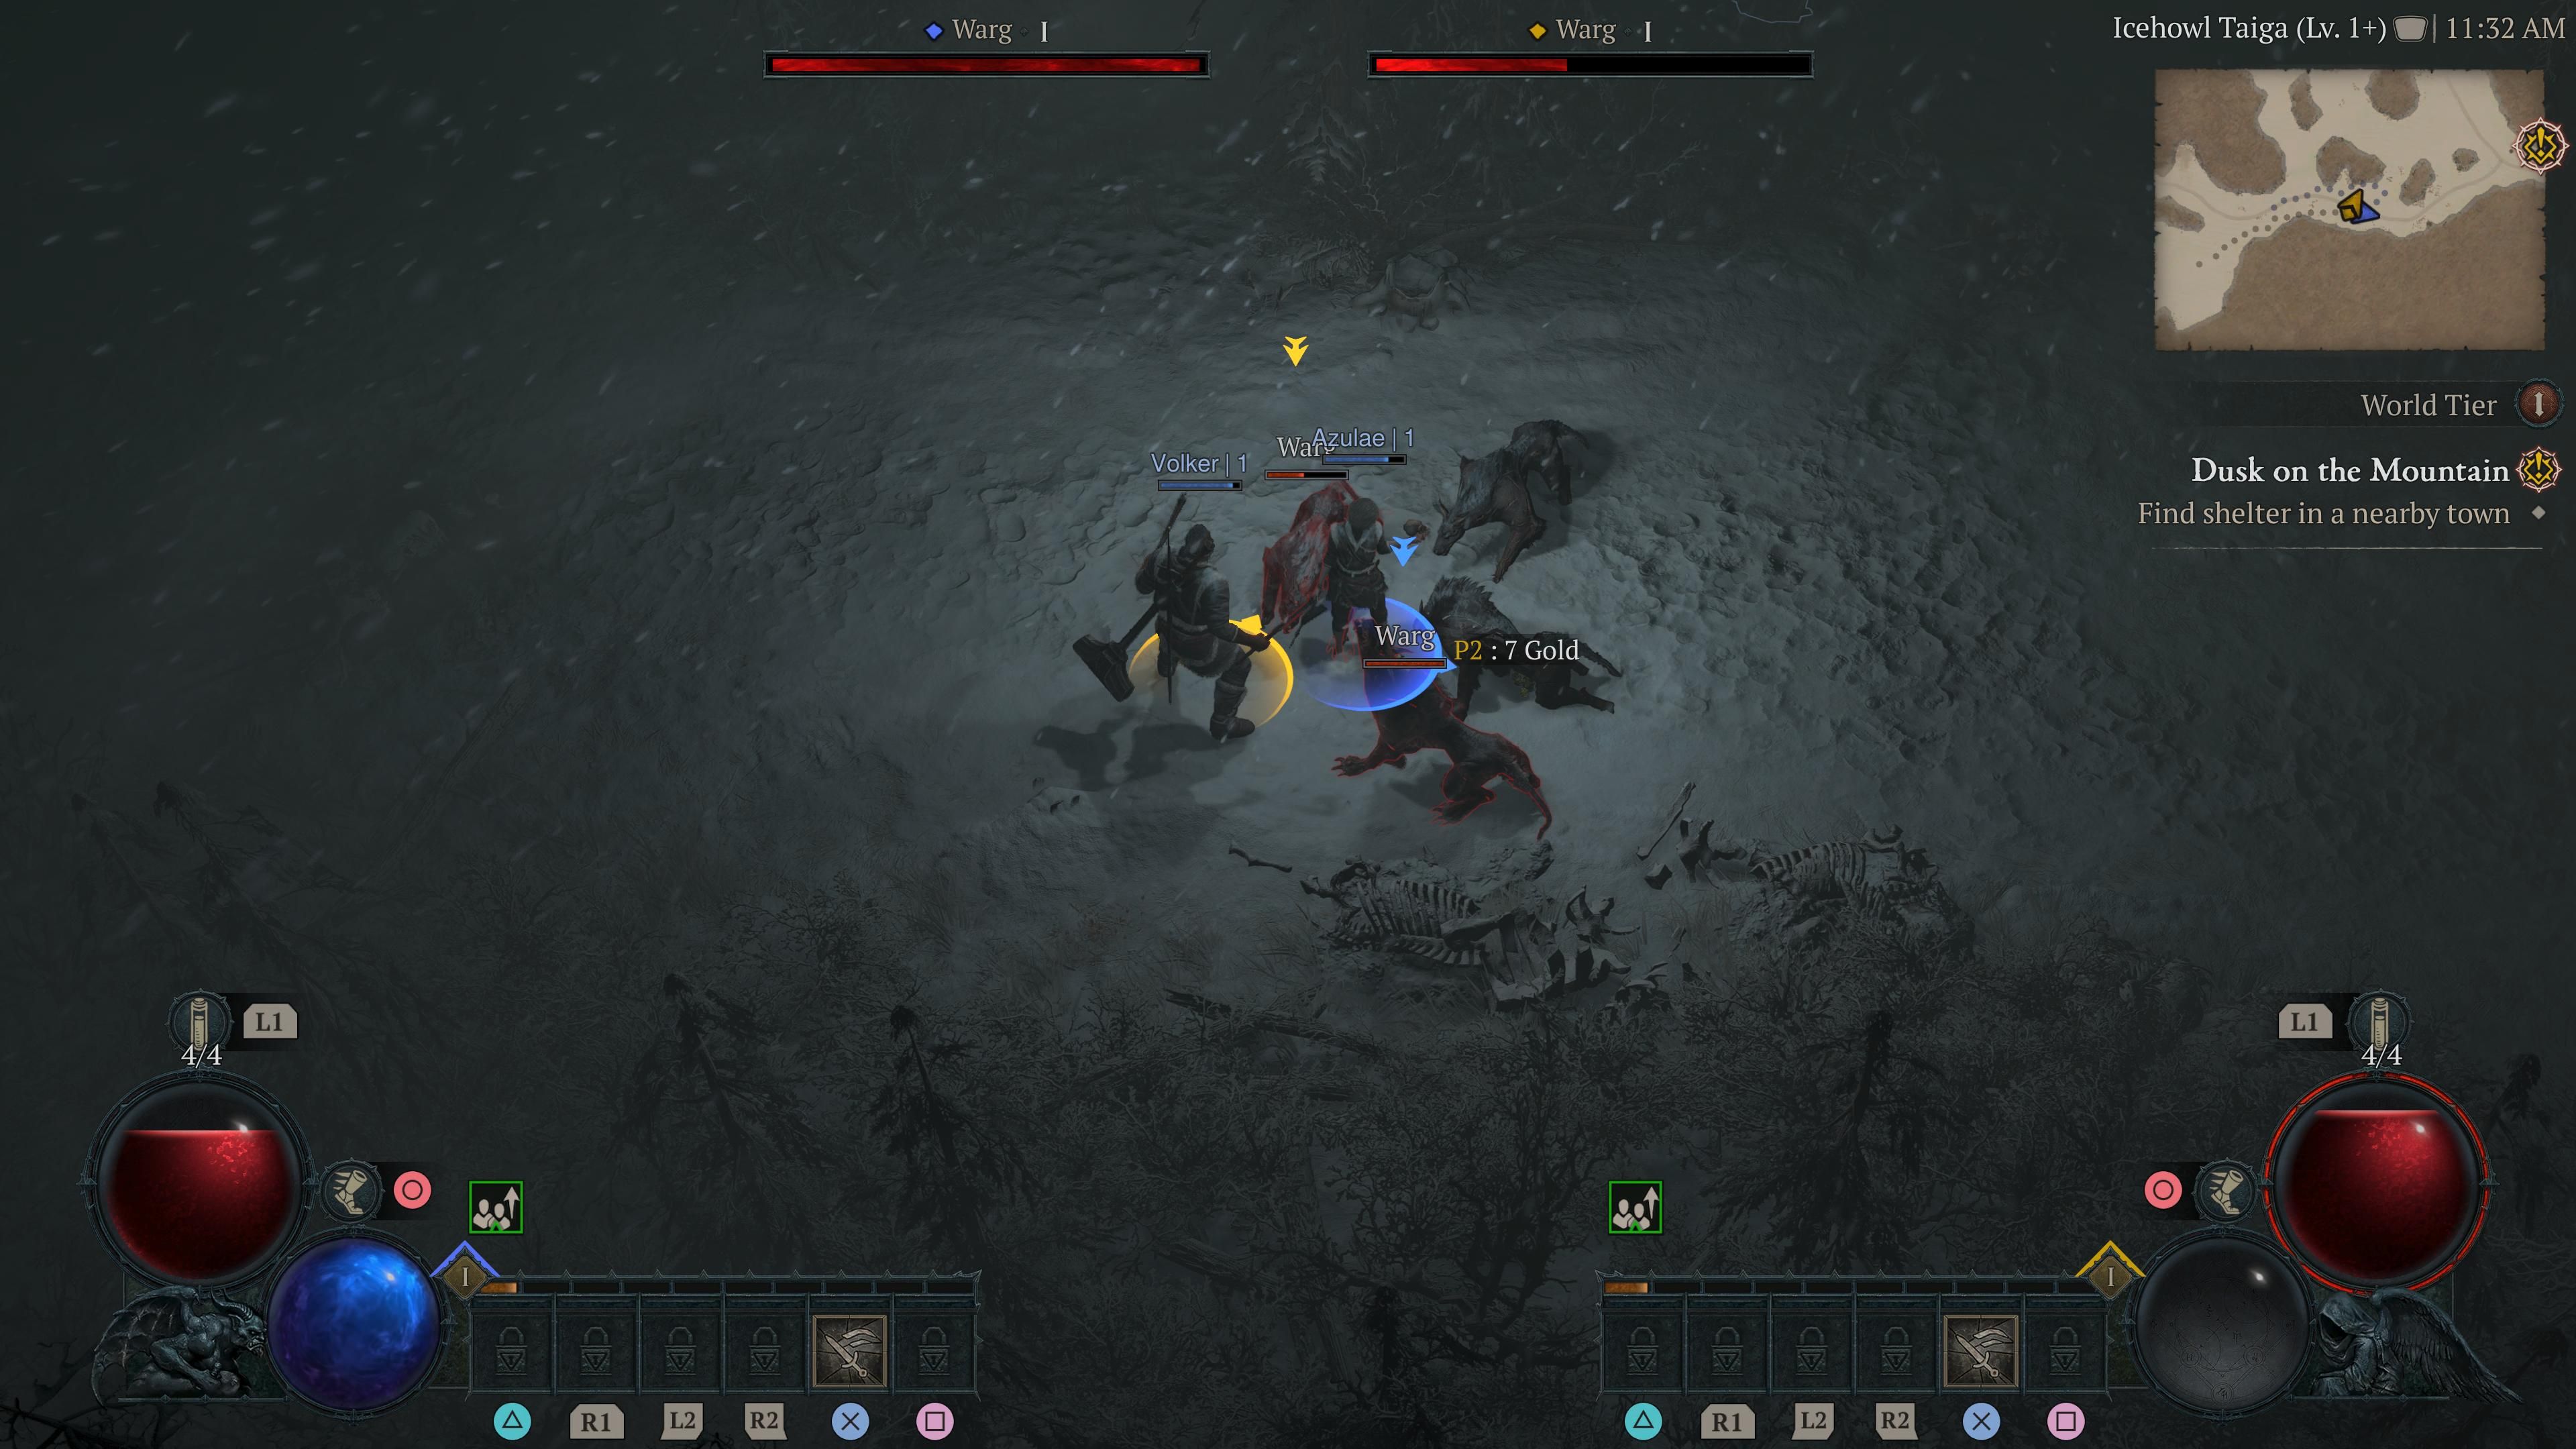 Diablo 4 couch co-op shows two characters fighting a mob of enemies